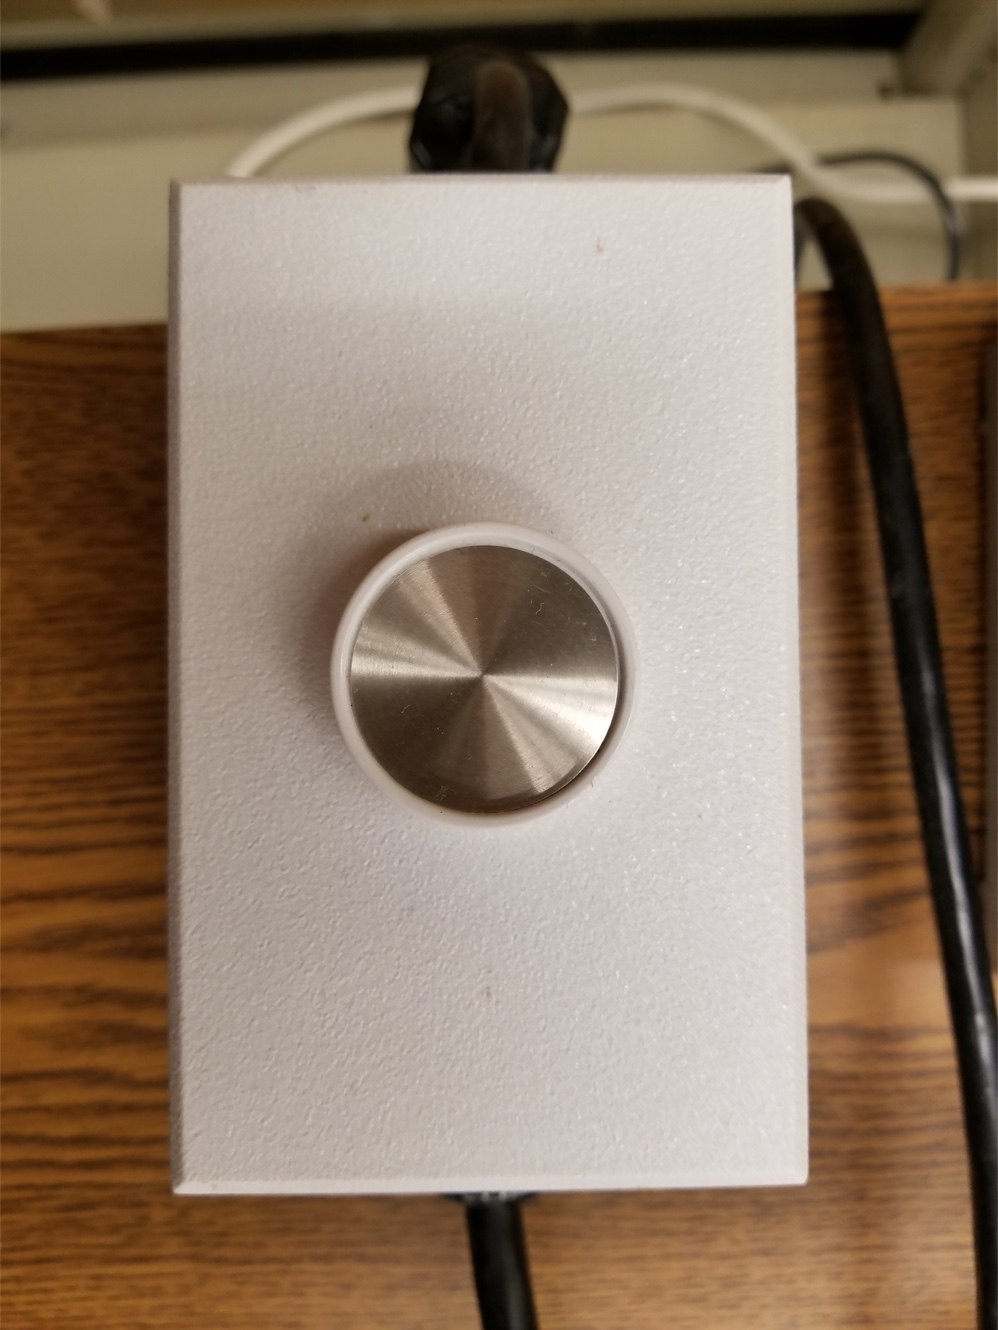 Image of Copy Stand light dimmer control knob